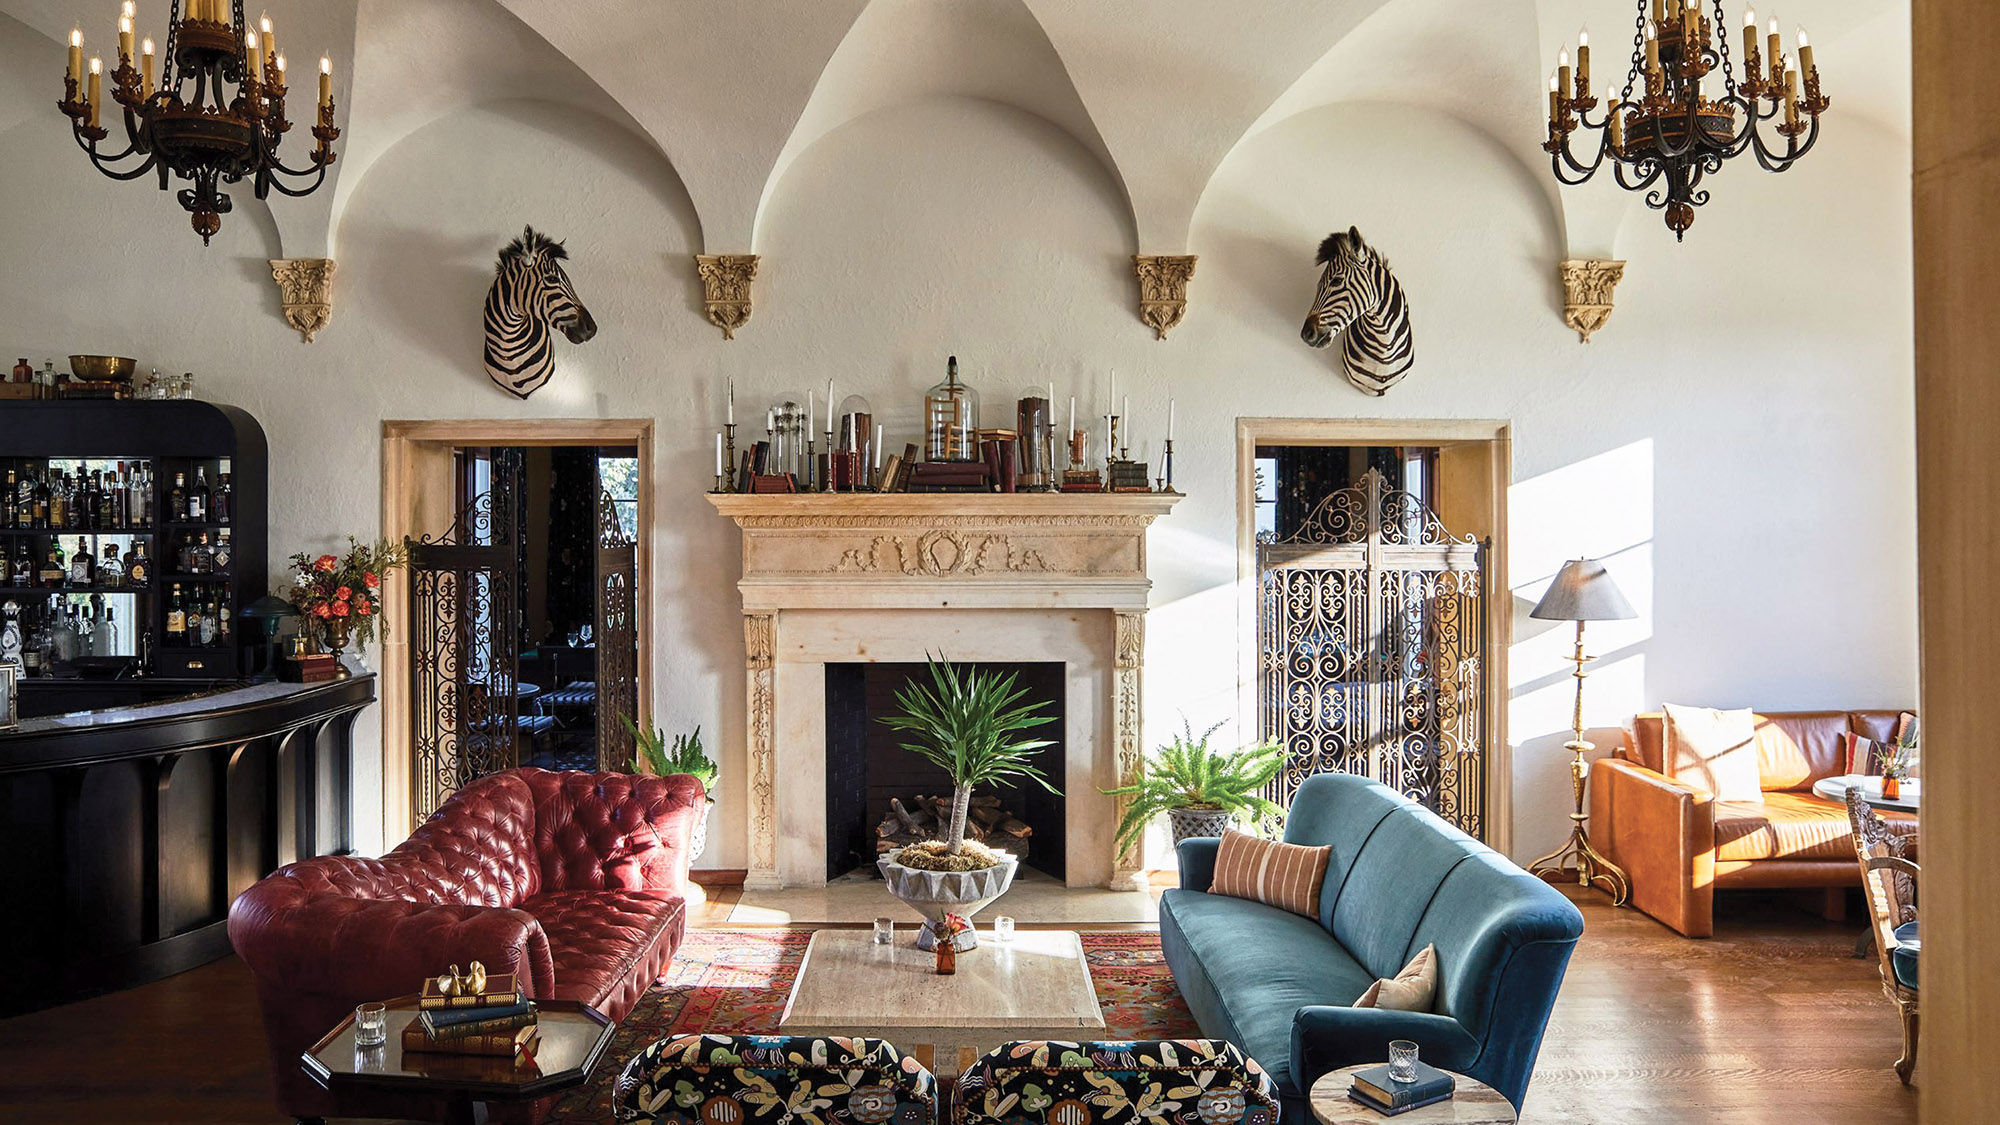 Eclectic furnishings make the mansion living room feel more like home than a hotel.